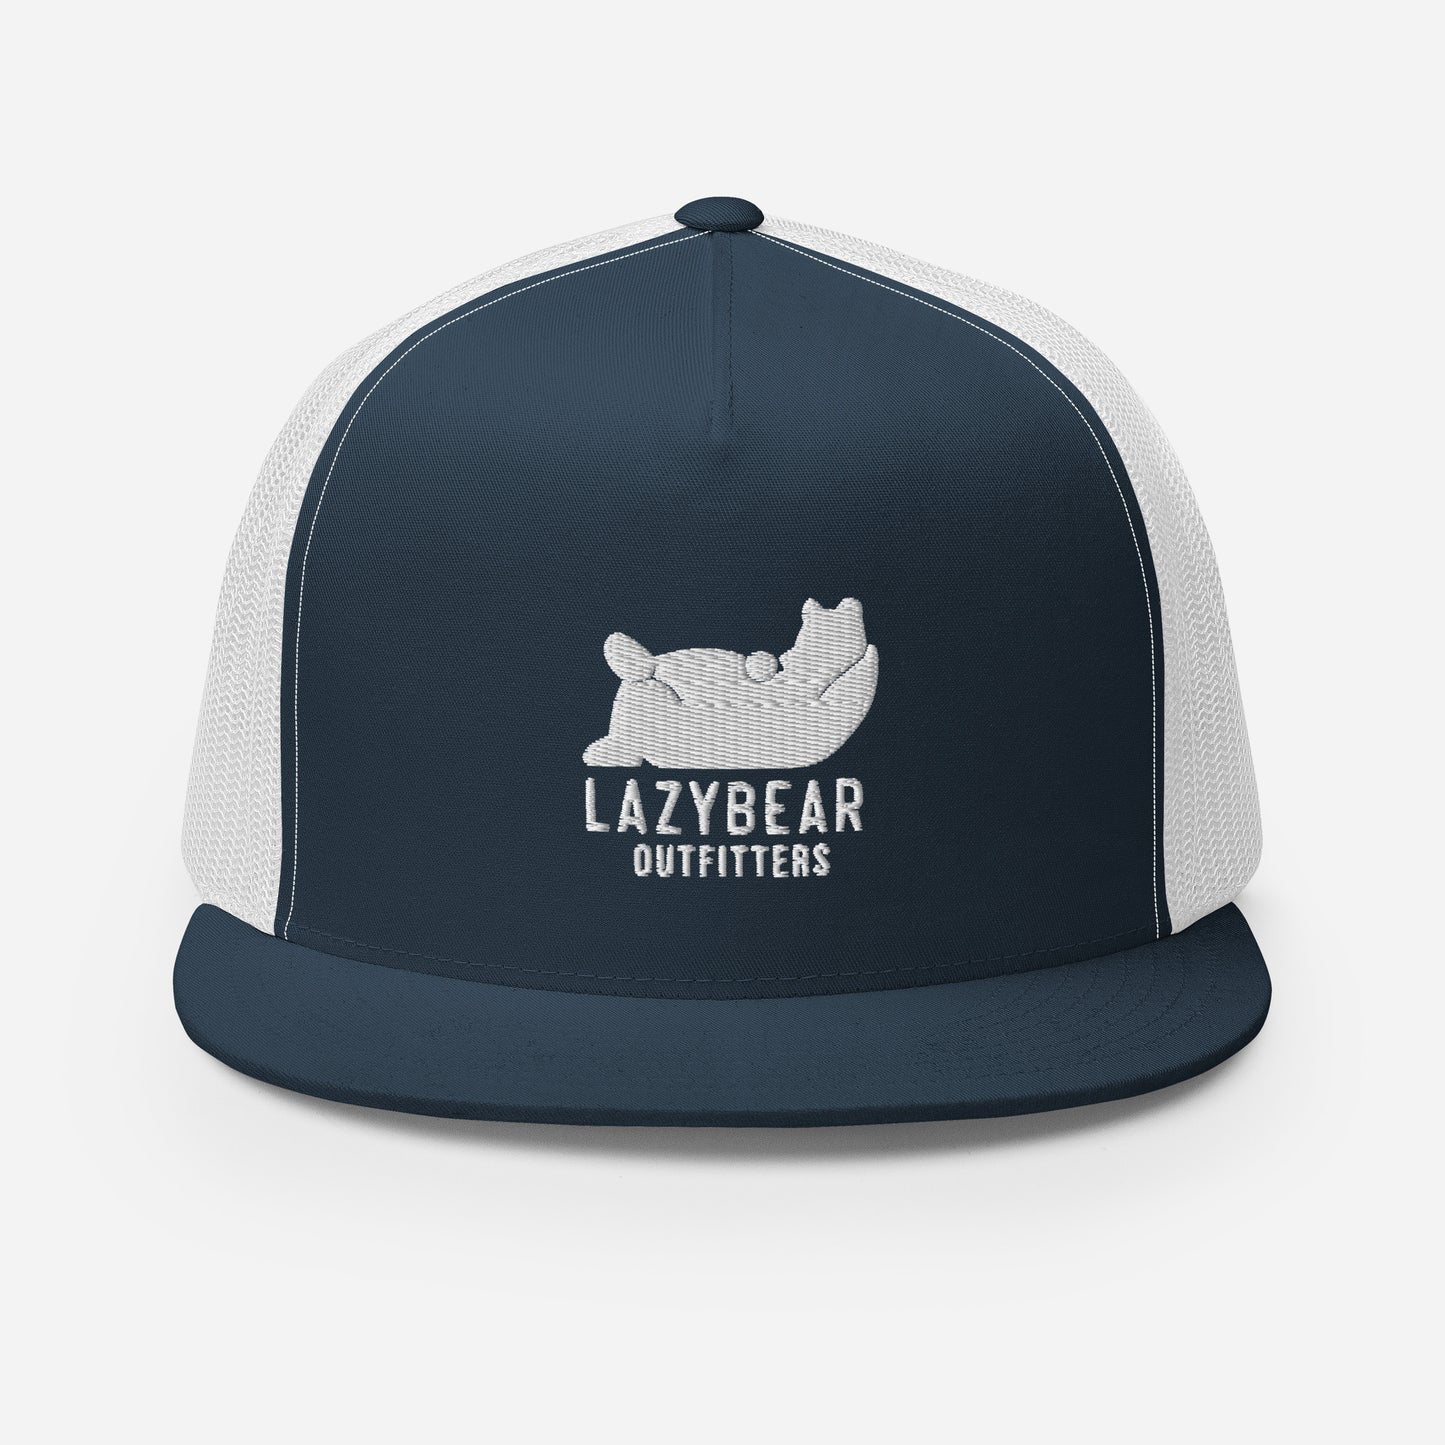 Lazy Bear "Bear" Embroidered Trucker Hat